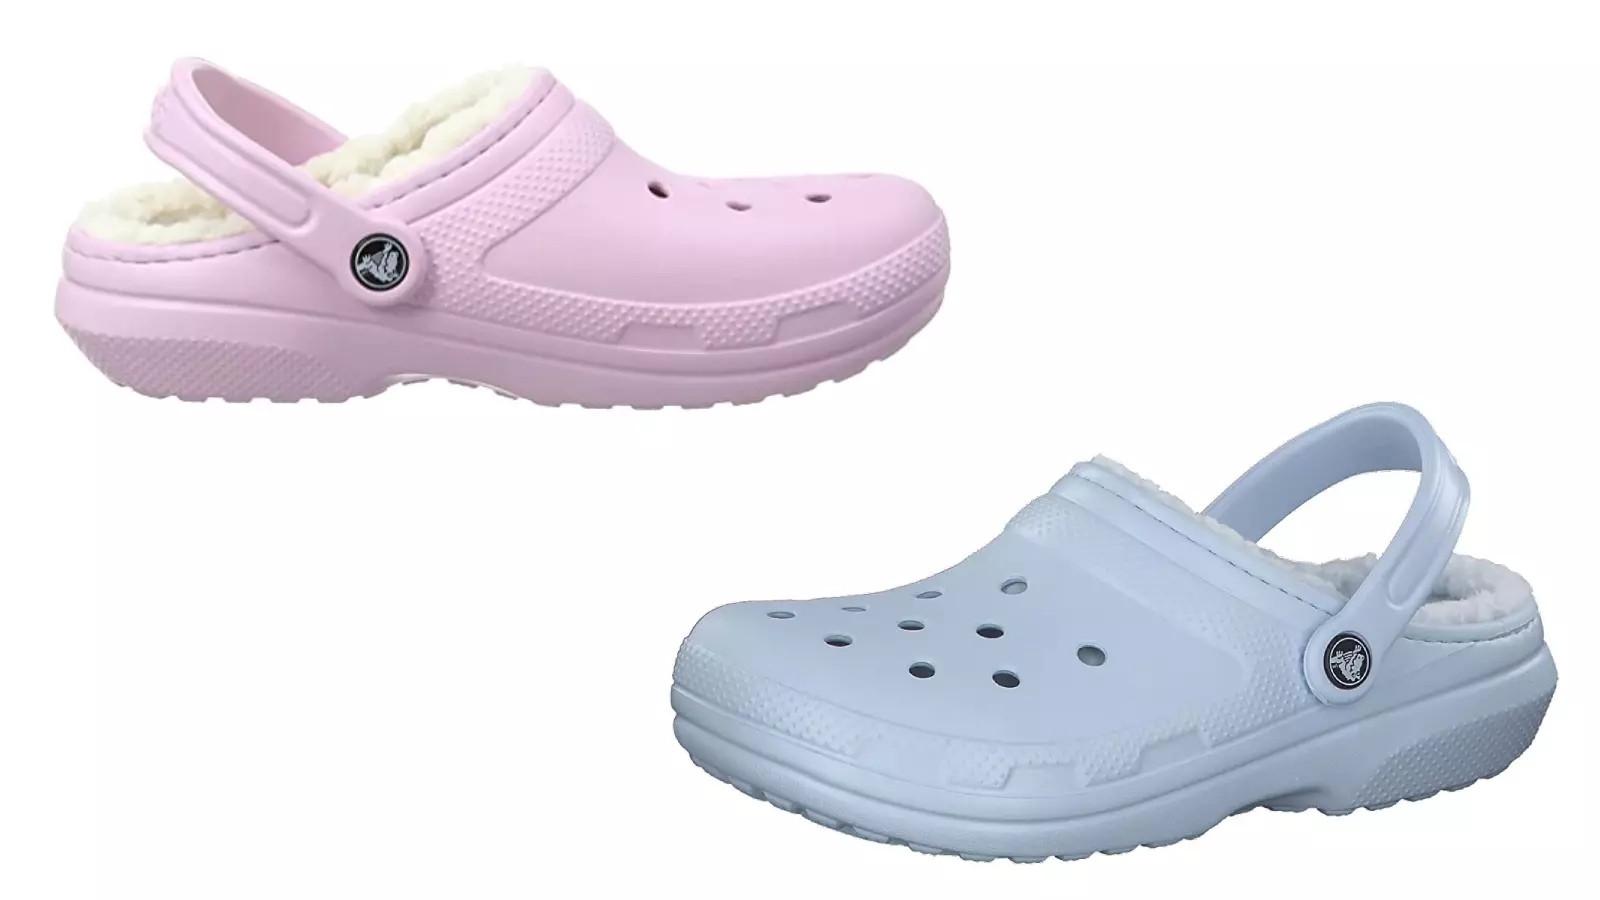 Crocs come in a bunch of fun colors, making them a mood-boosting clog for those cold and dark days.